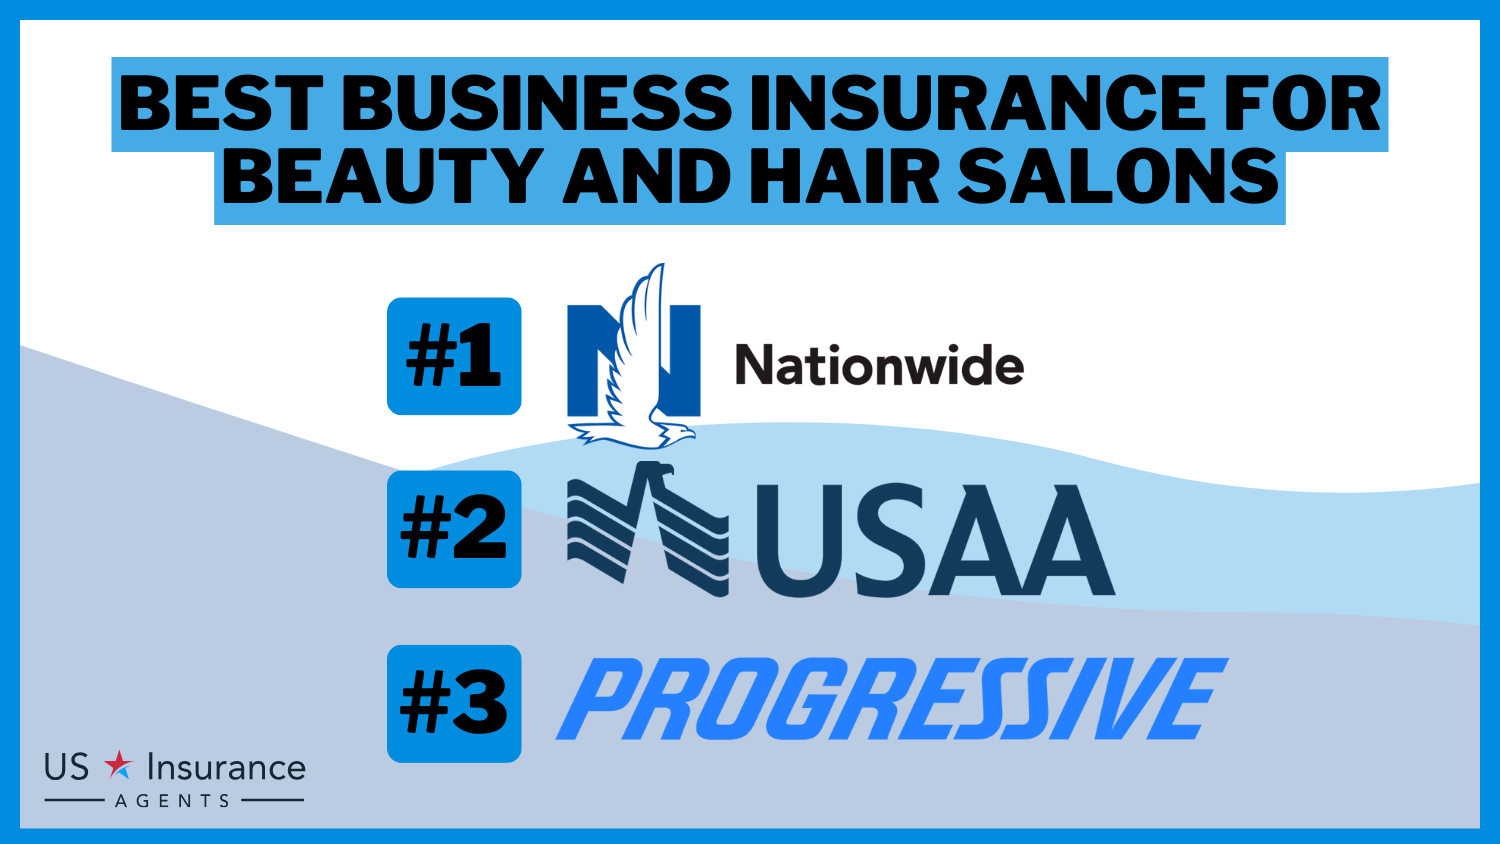 3 Best Business Insurance for Beauty and Hair Salons: Nationwide, USAA and Progressive.